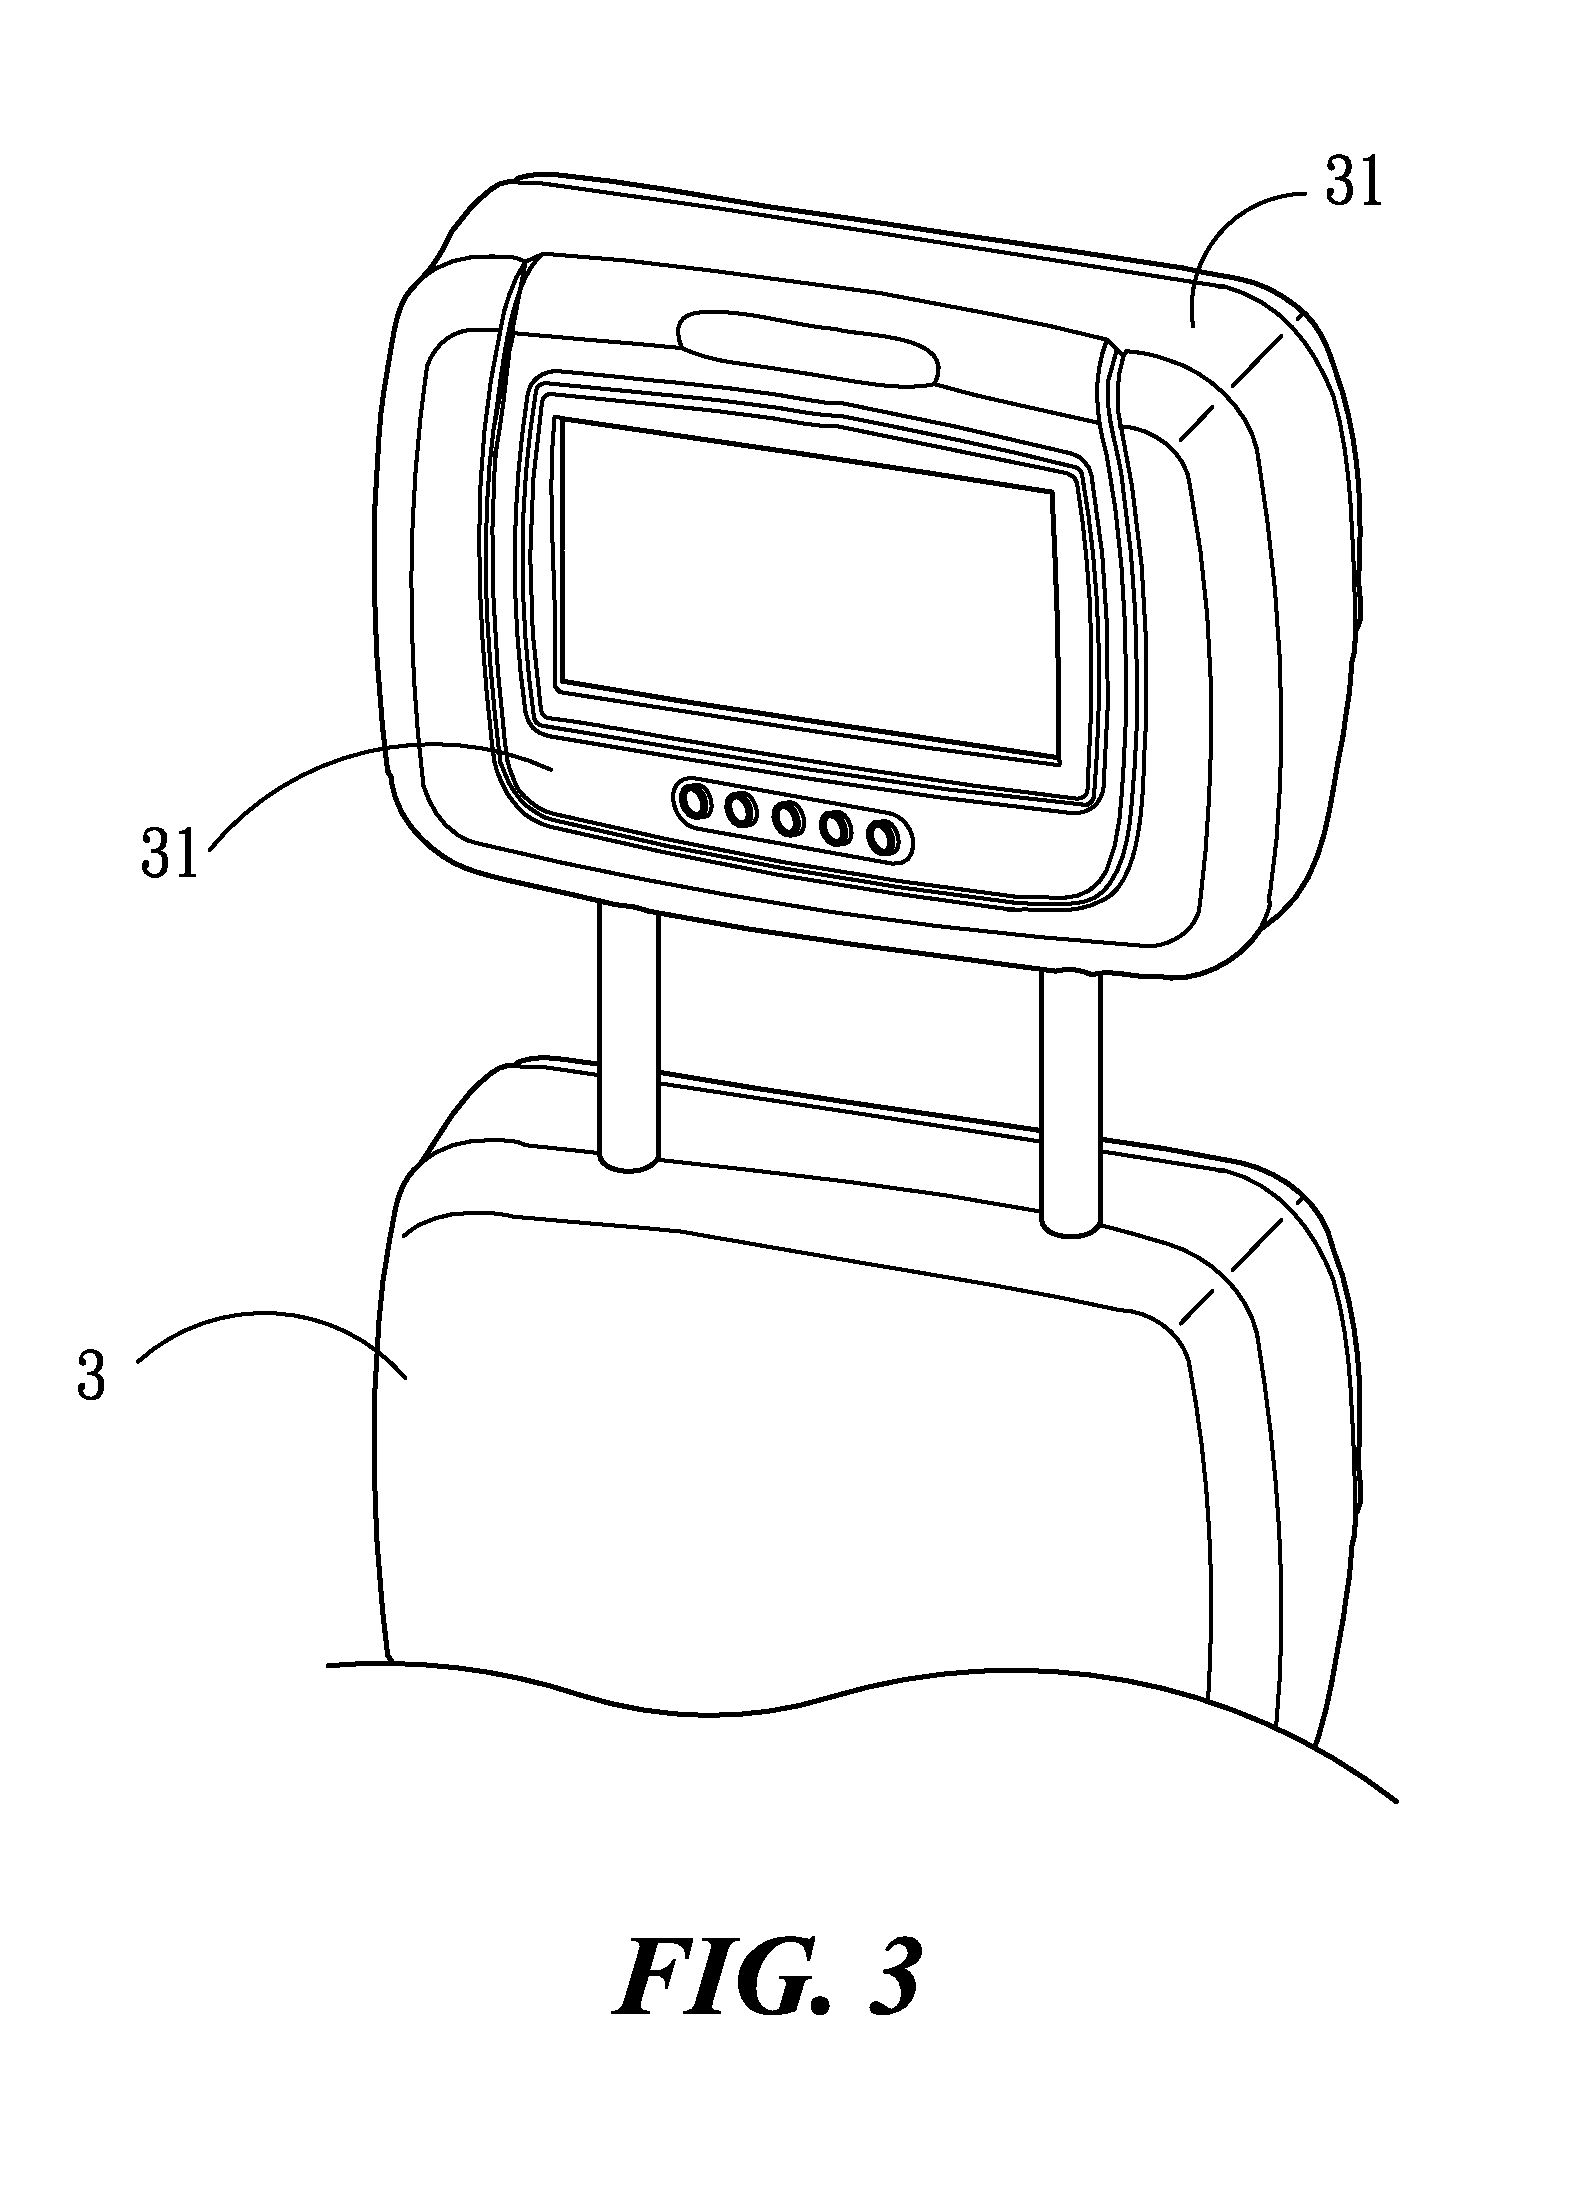 Reception Structure for Mobile Video and Audio Device